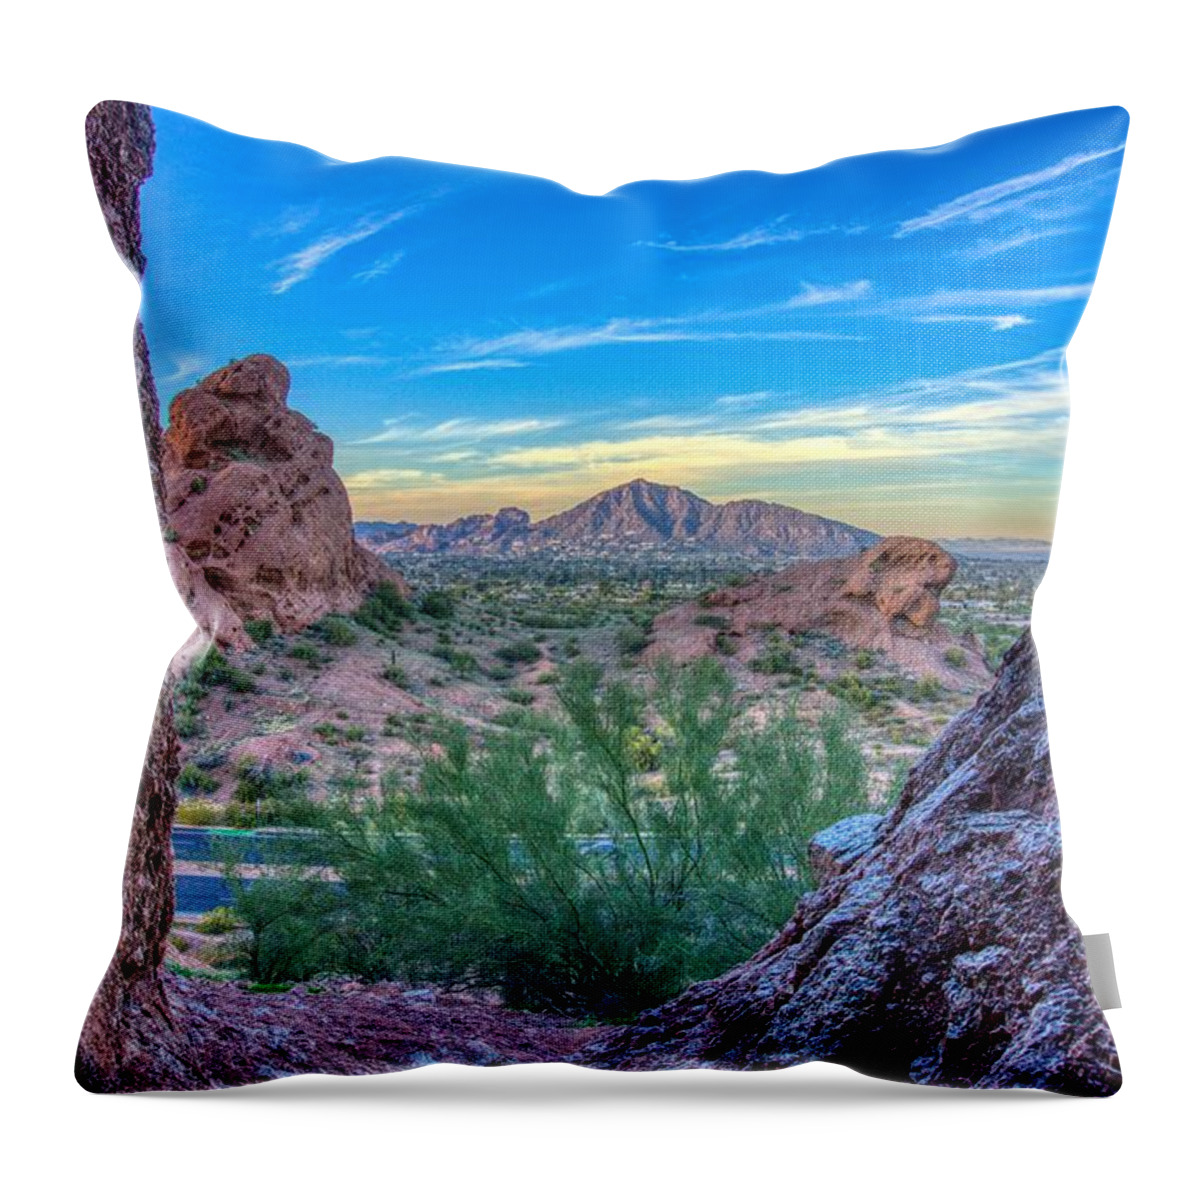 Sunsets Throw Pillow featuring the photograph Desert Paradise by Anthony Giammarino